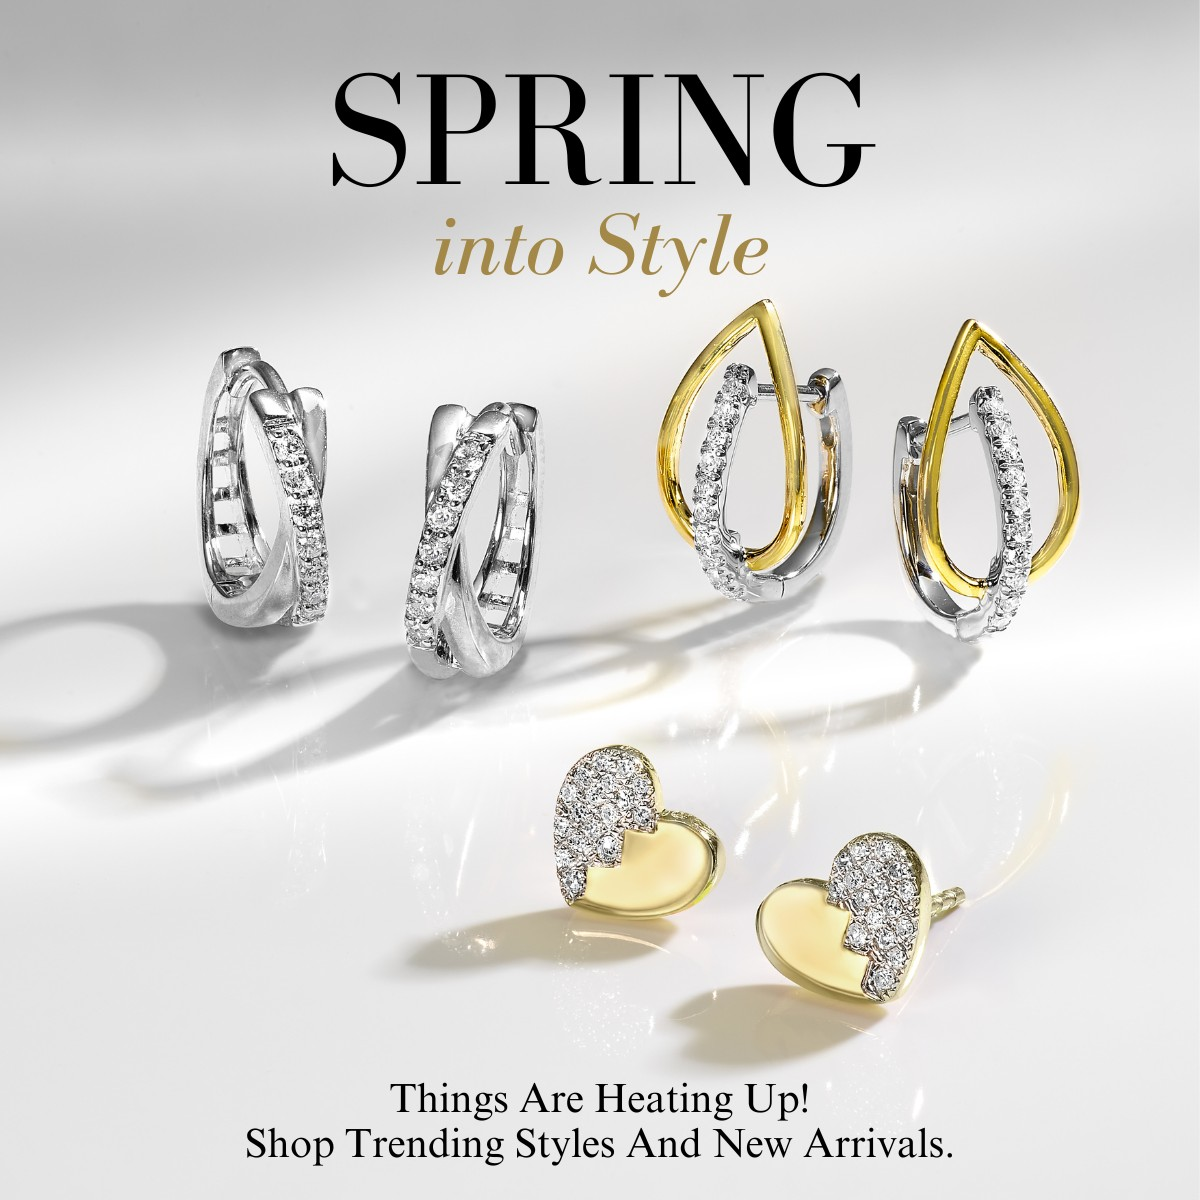 Robert Irwin Jewelers in Memphis, TN Spring Jewelry Sale. Save up to 50% Off plus free shipping!